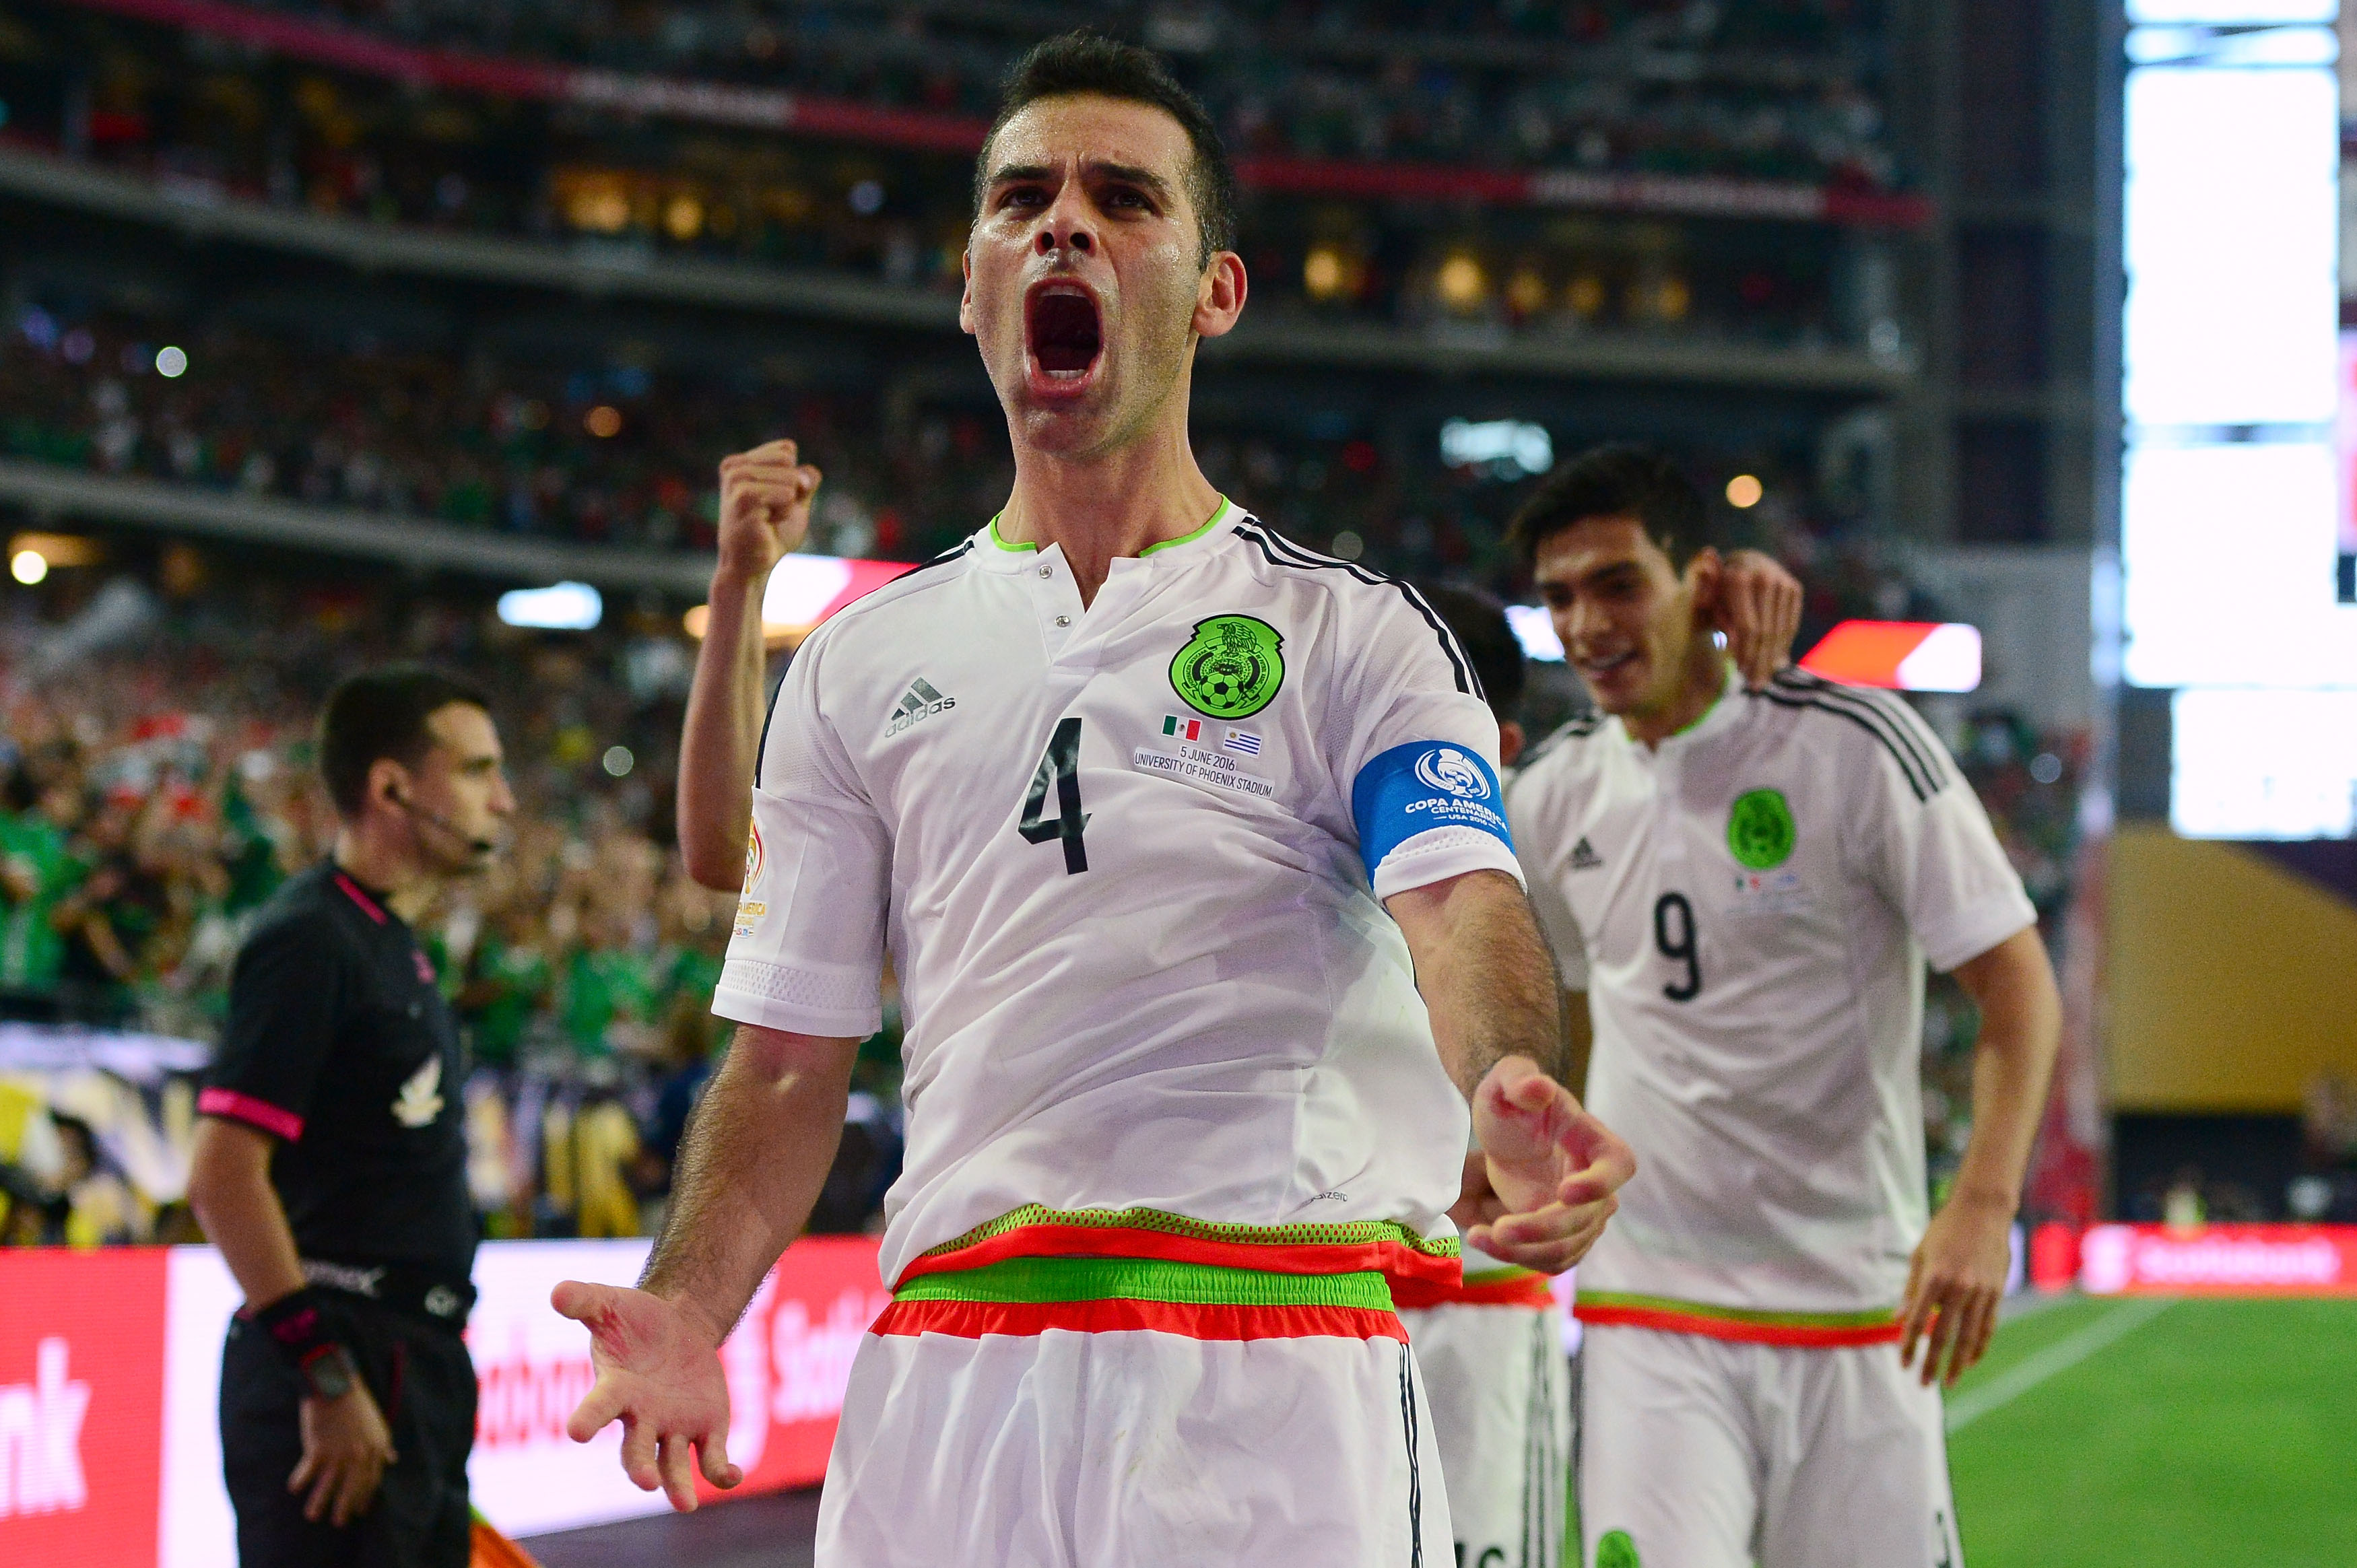 GLENDALE, AZ - JUNE 05:  Rafael Marquez #4 of Mexico celebrates after scoring a goal in the second half during the 2016 Copa America Centenario Group C match against Uruguay at University of Phoenix Stadium on June 5, 2016 in Glendale, Arizona.  (Photo by Jennifer Stewart/Getty Images)